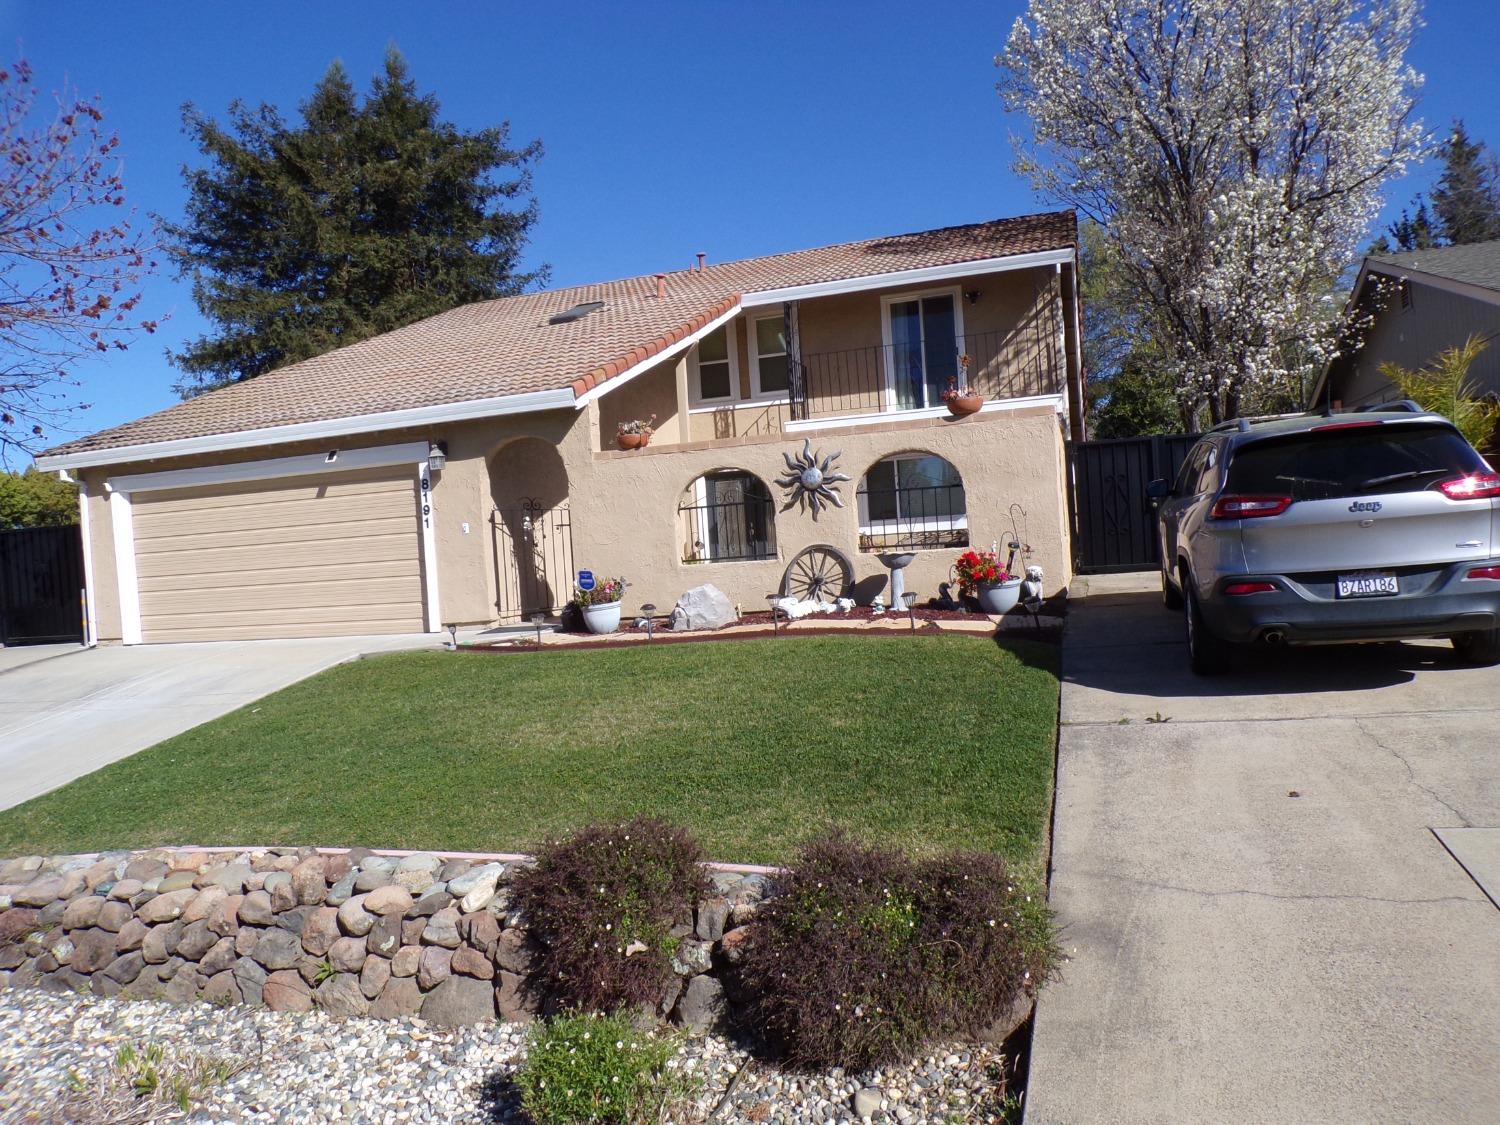 Photo of 8191 Stacey Hills Dr in Citrus Heights, CA